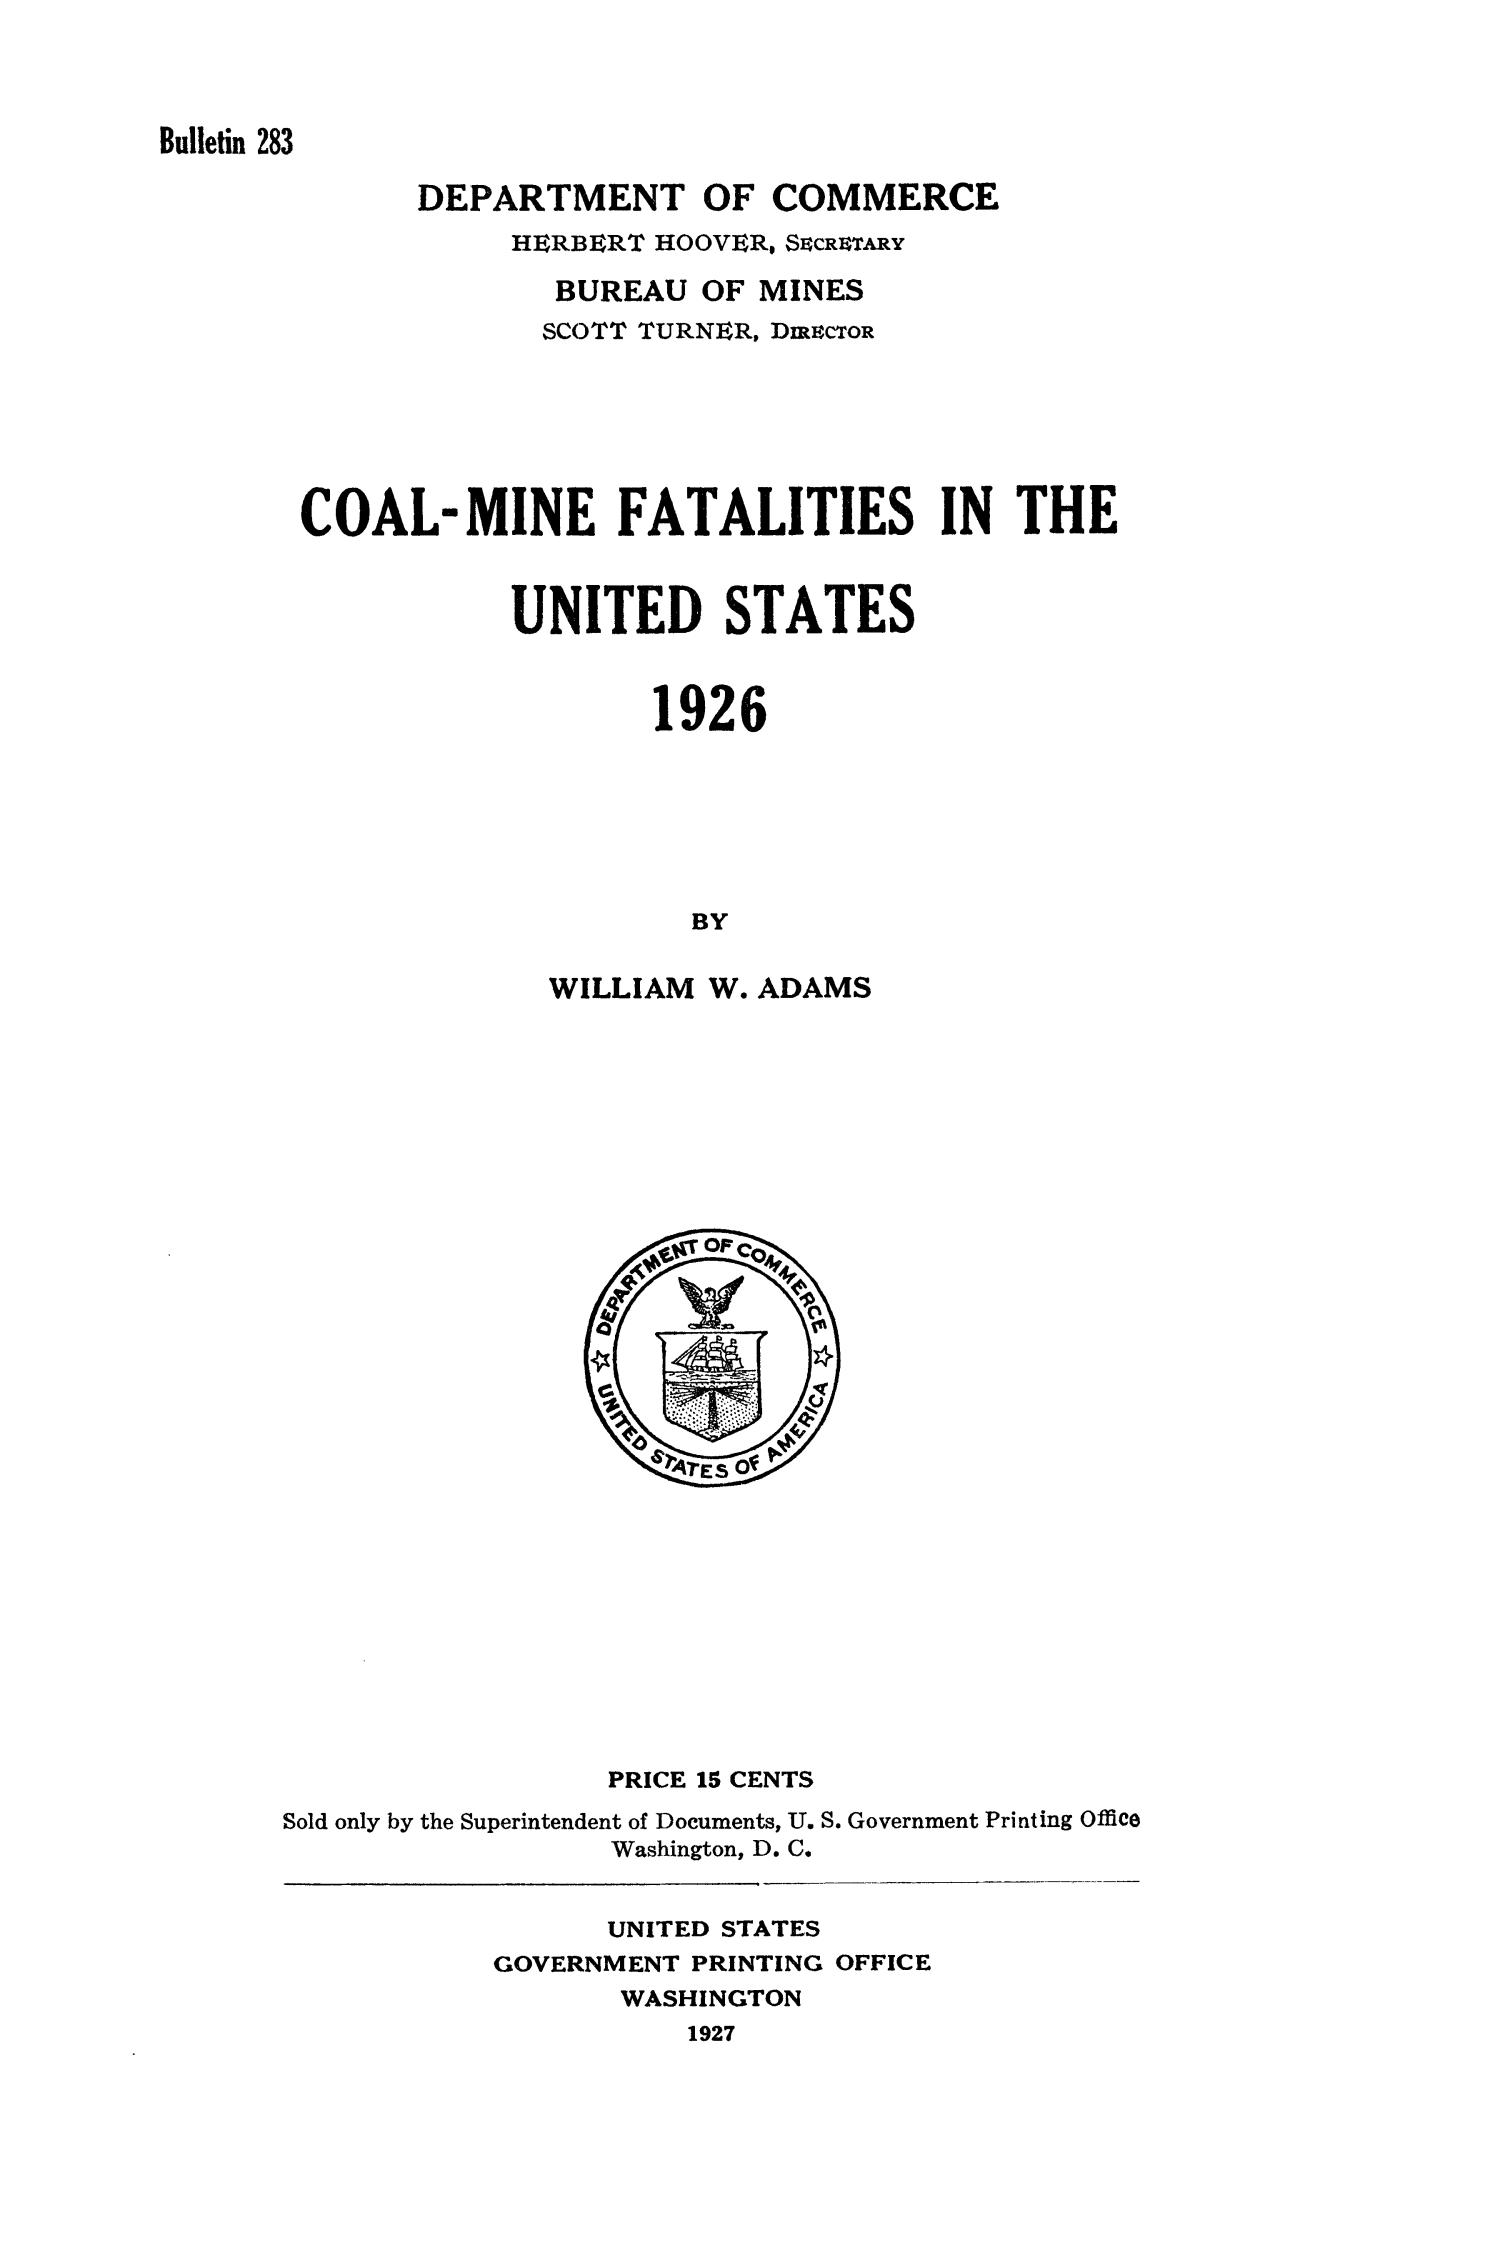 Coal-Mine Fatalities in the United States, 1926
                                                
                                                    I
                                                